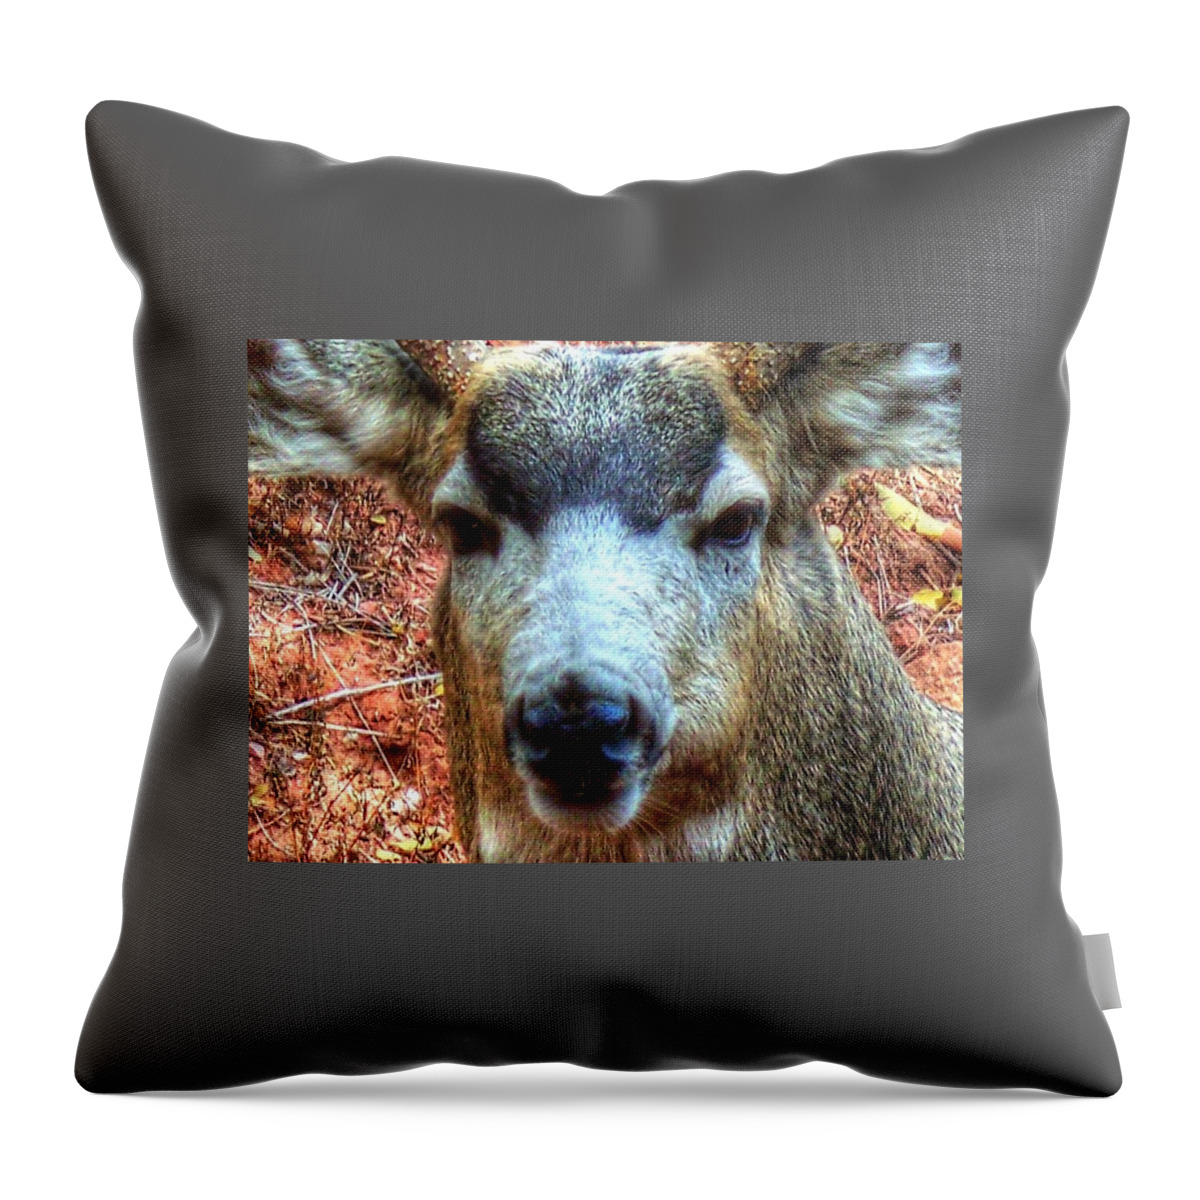 Deer Throw Pillow featuring the photograph The Buck II by Lanita Williams